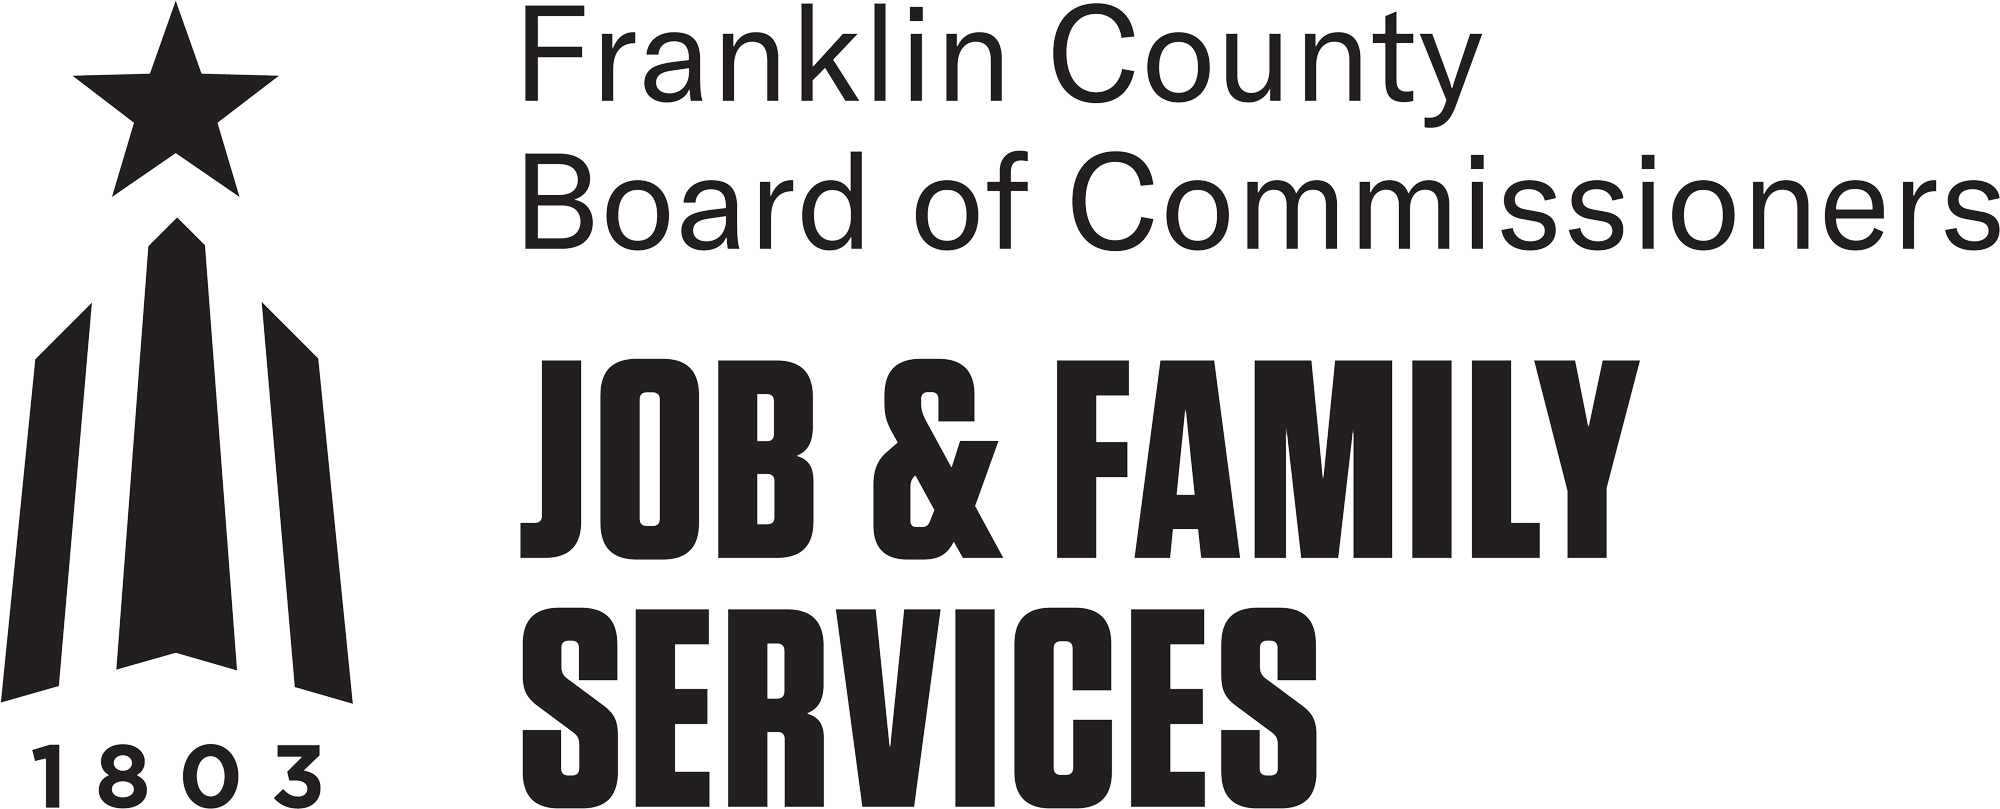 Franklin County Board of Commissioners Job & Family Services logo